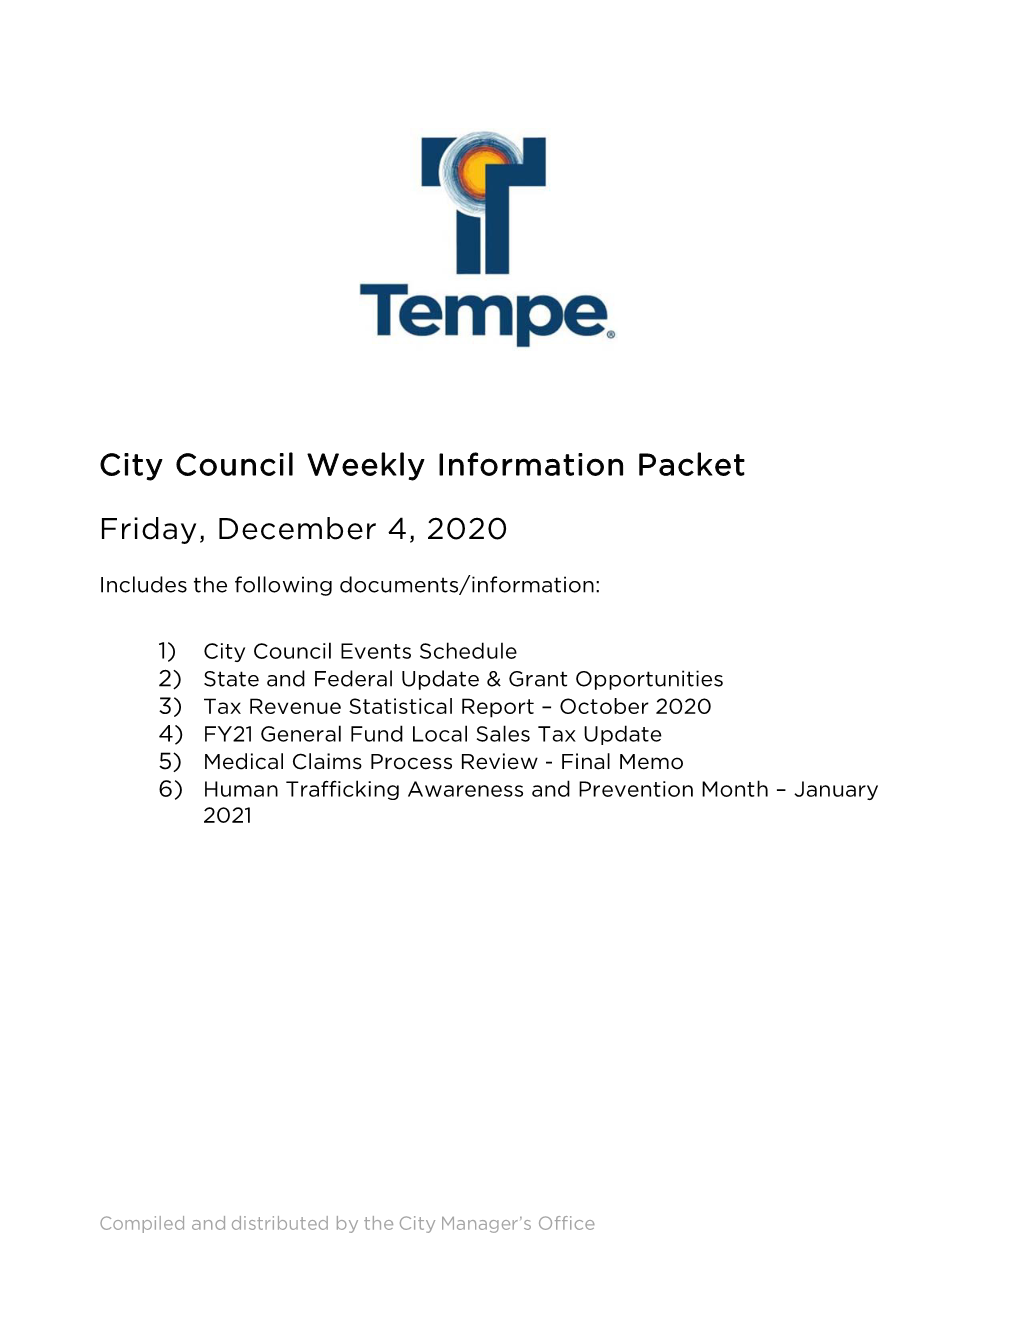 City Council Weekly Information Packet Friday, December 4, 2020